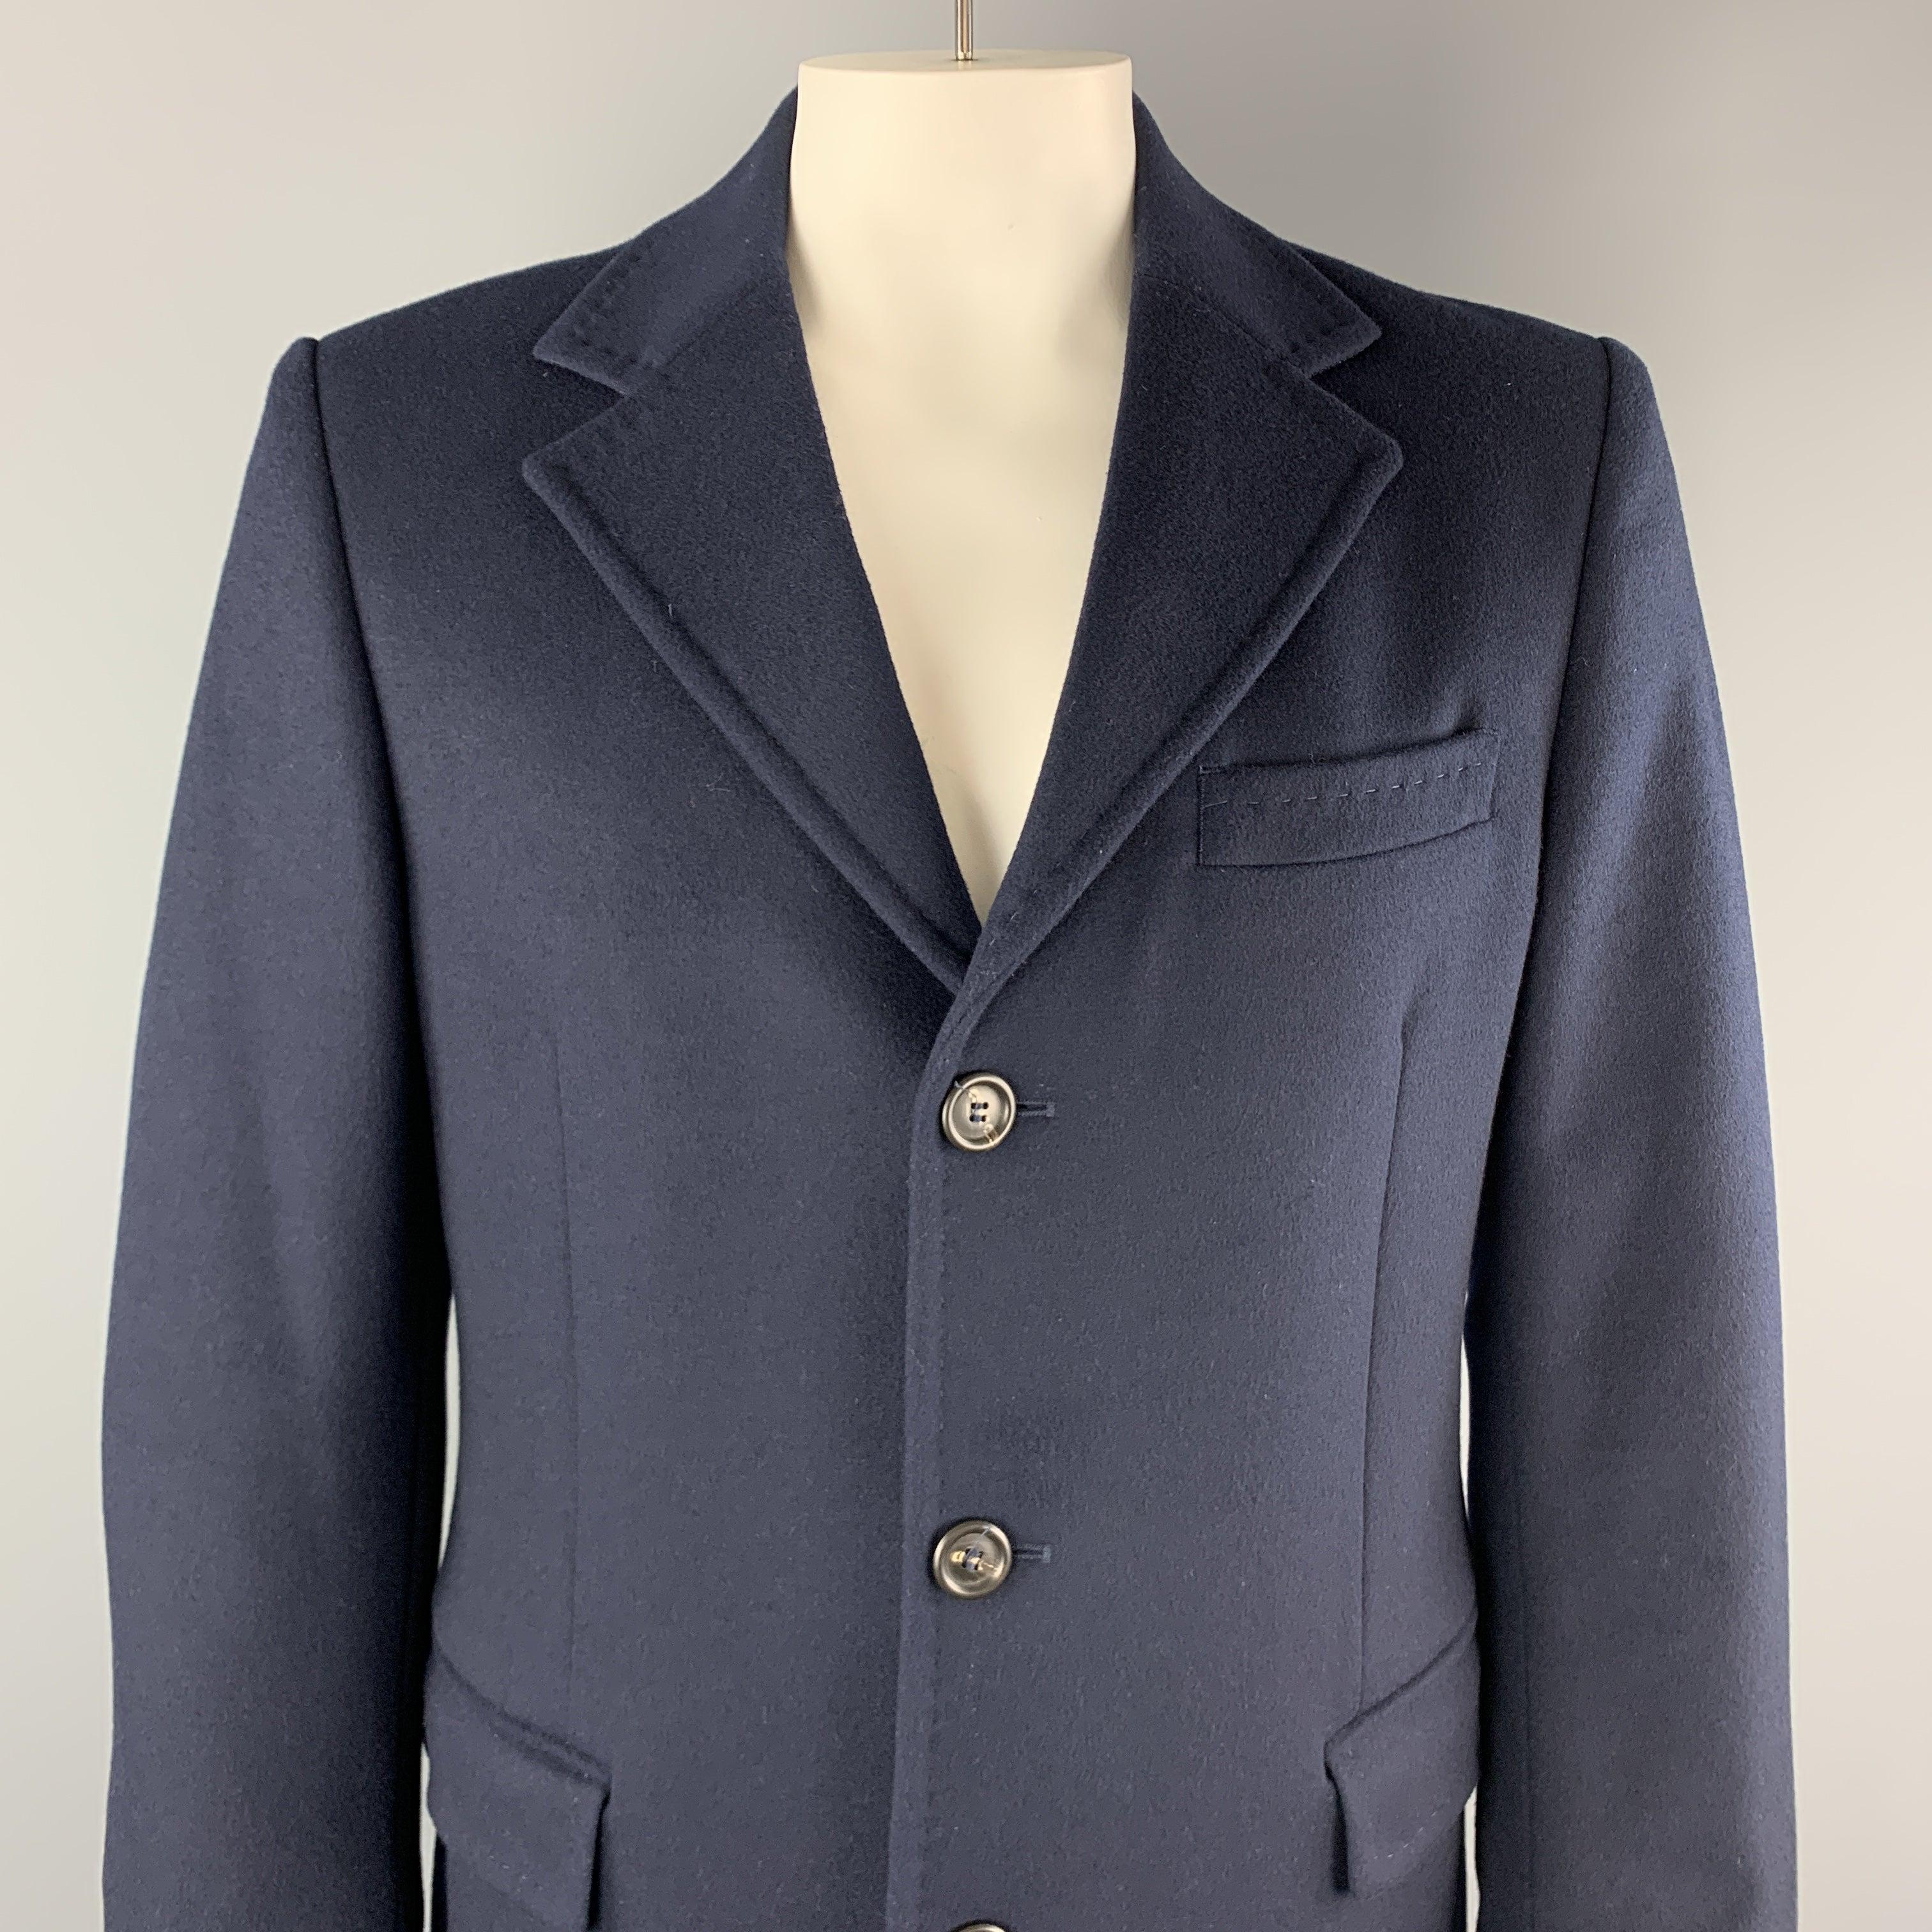 UNITED COLORS OF BENETTON coat comes in navy wool blend with a top stitch notch lapel, single breasted, three button front, and flap pockets.
Very Good
Pre-Owned Condition. 

Marked:  IT 52 

Measurements: 
 
Shoulder: 19 inches Chest:
46 inches